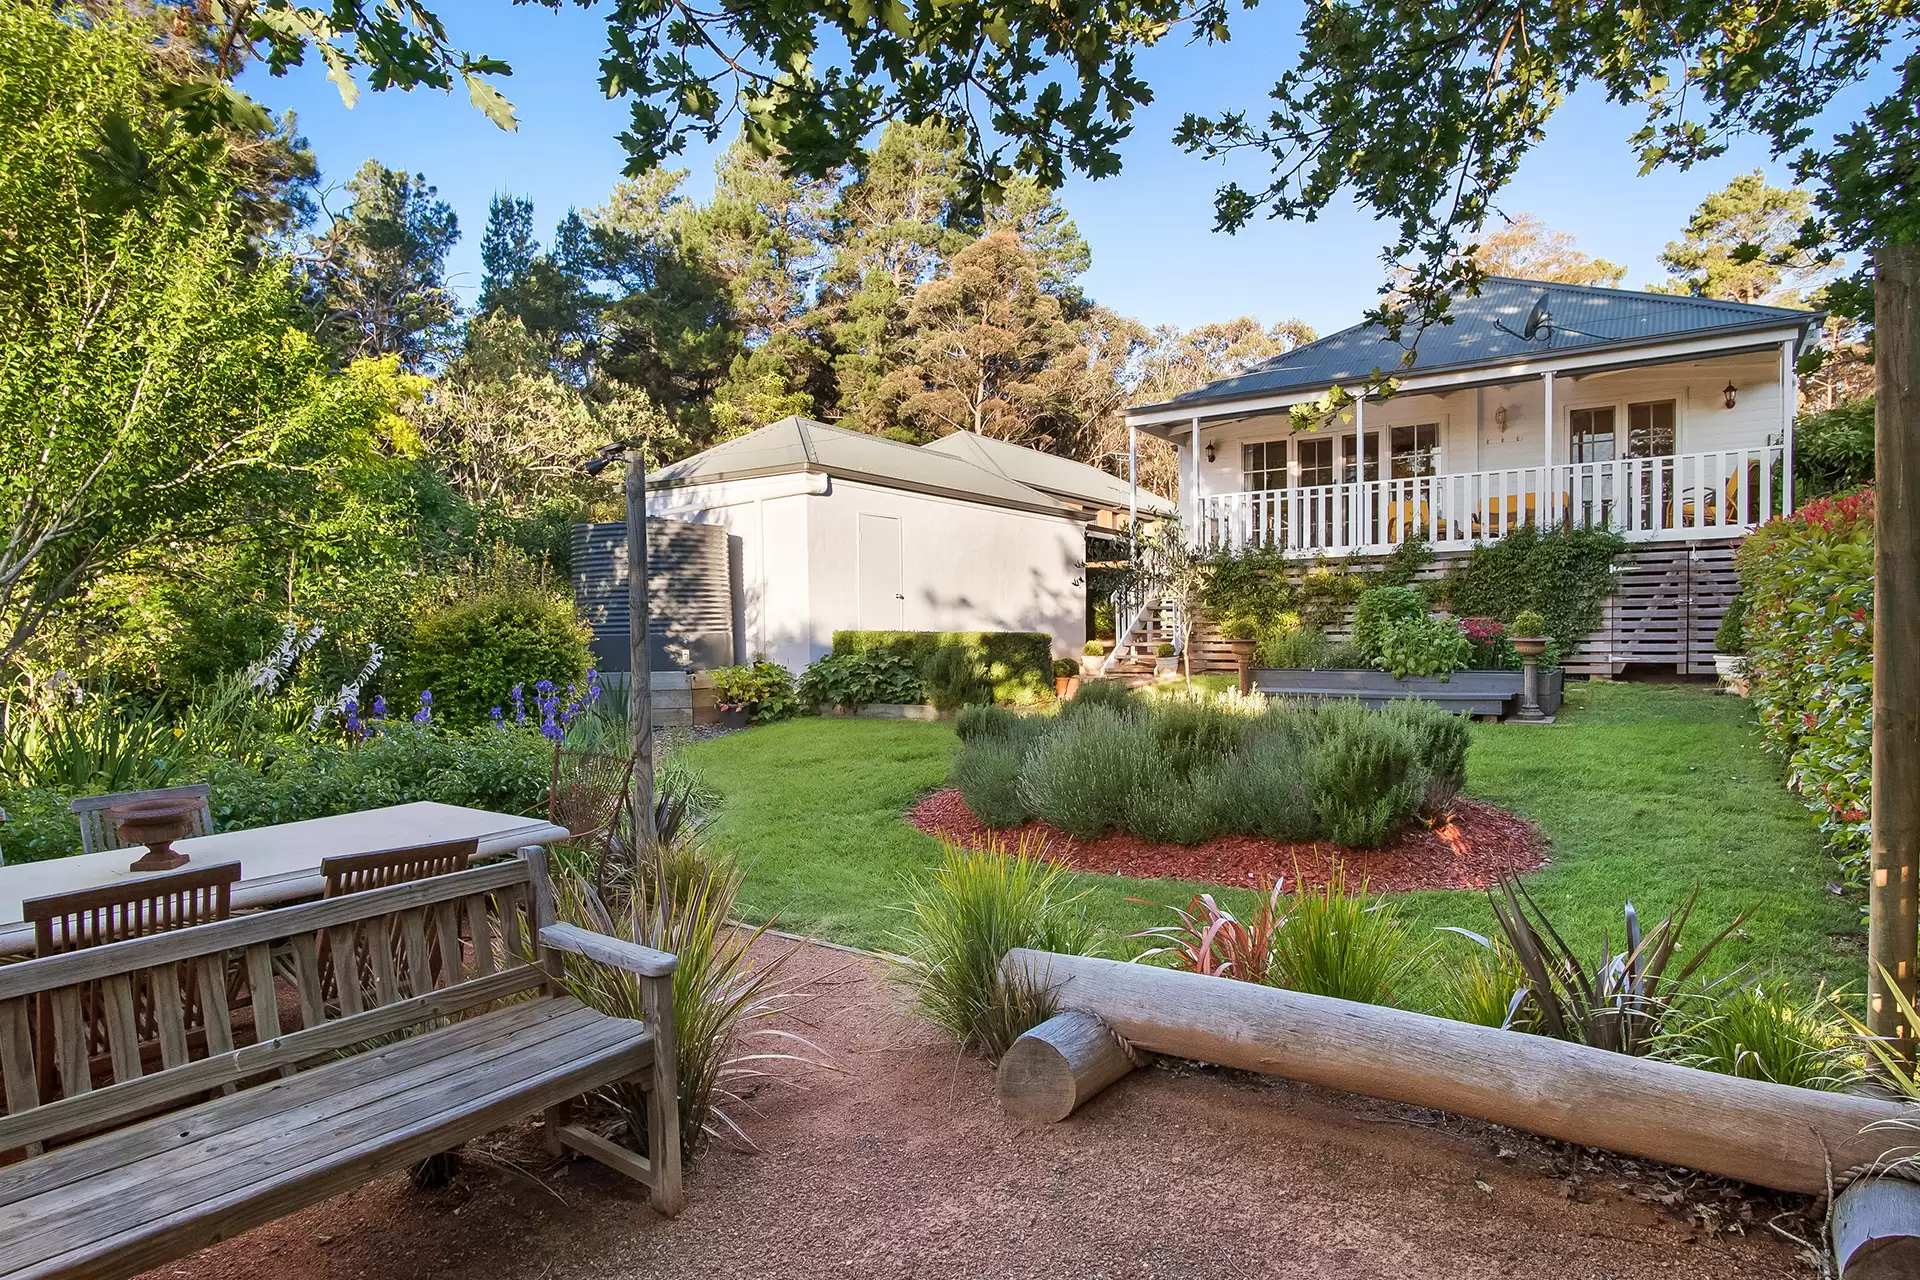 Photo #13: 8 Lennox Road, Berrima - Sold by Drew Lindsay Sotheby's International Realty